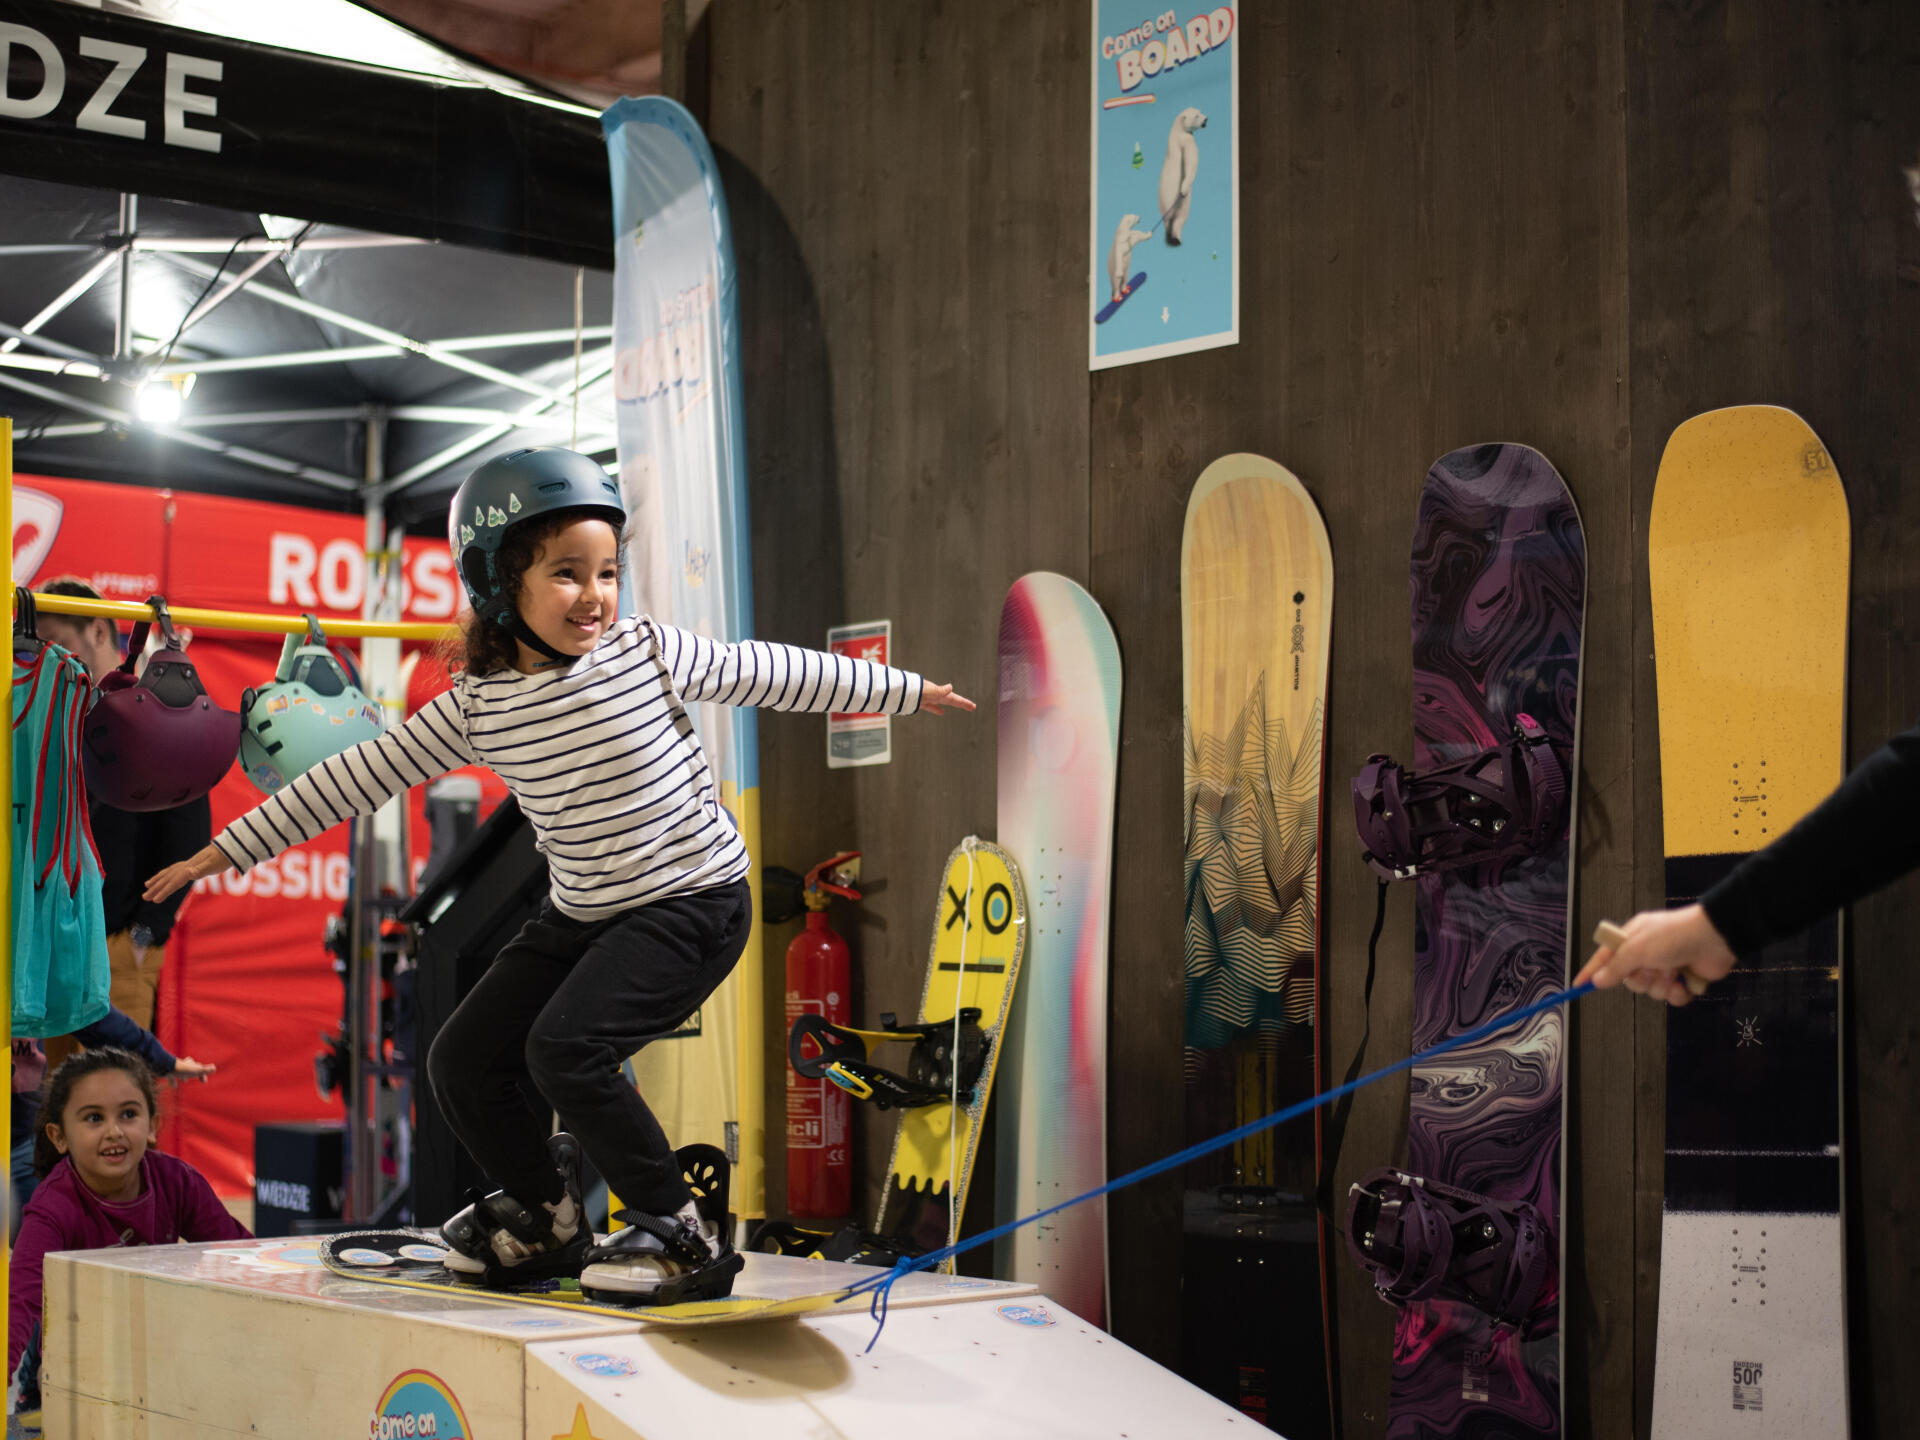 At what age can a child take their first snowboard lesson?